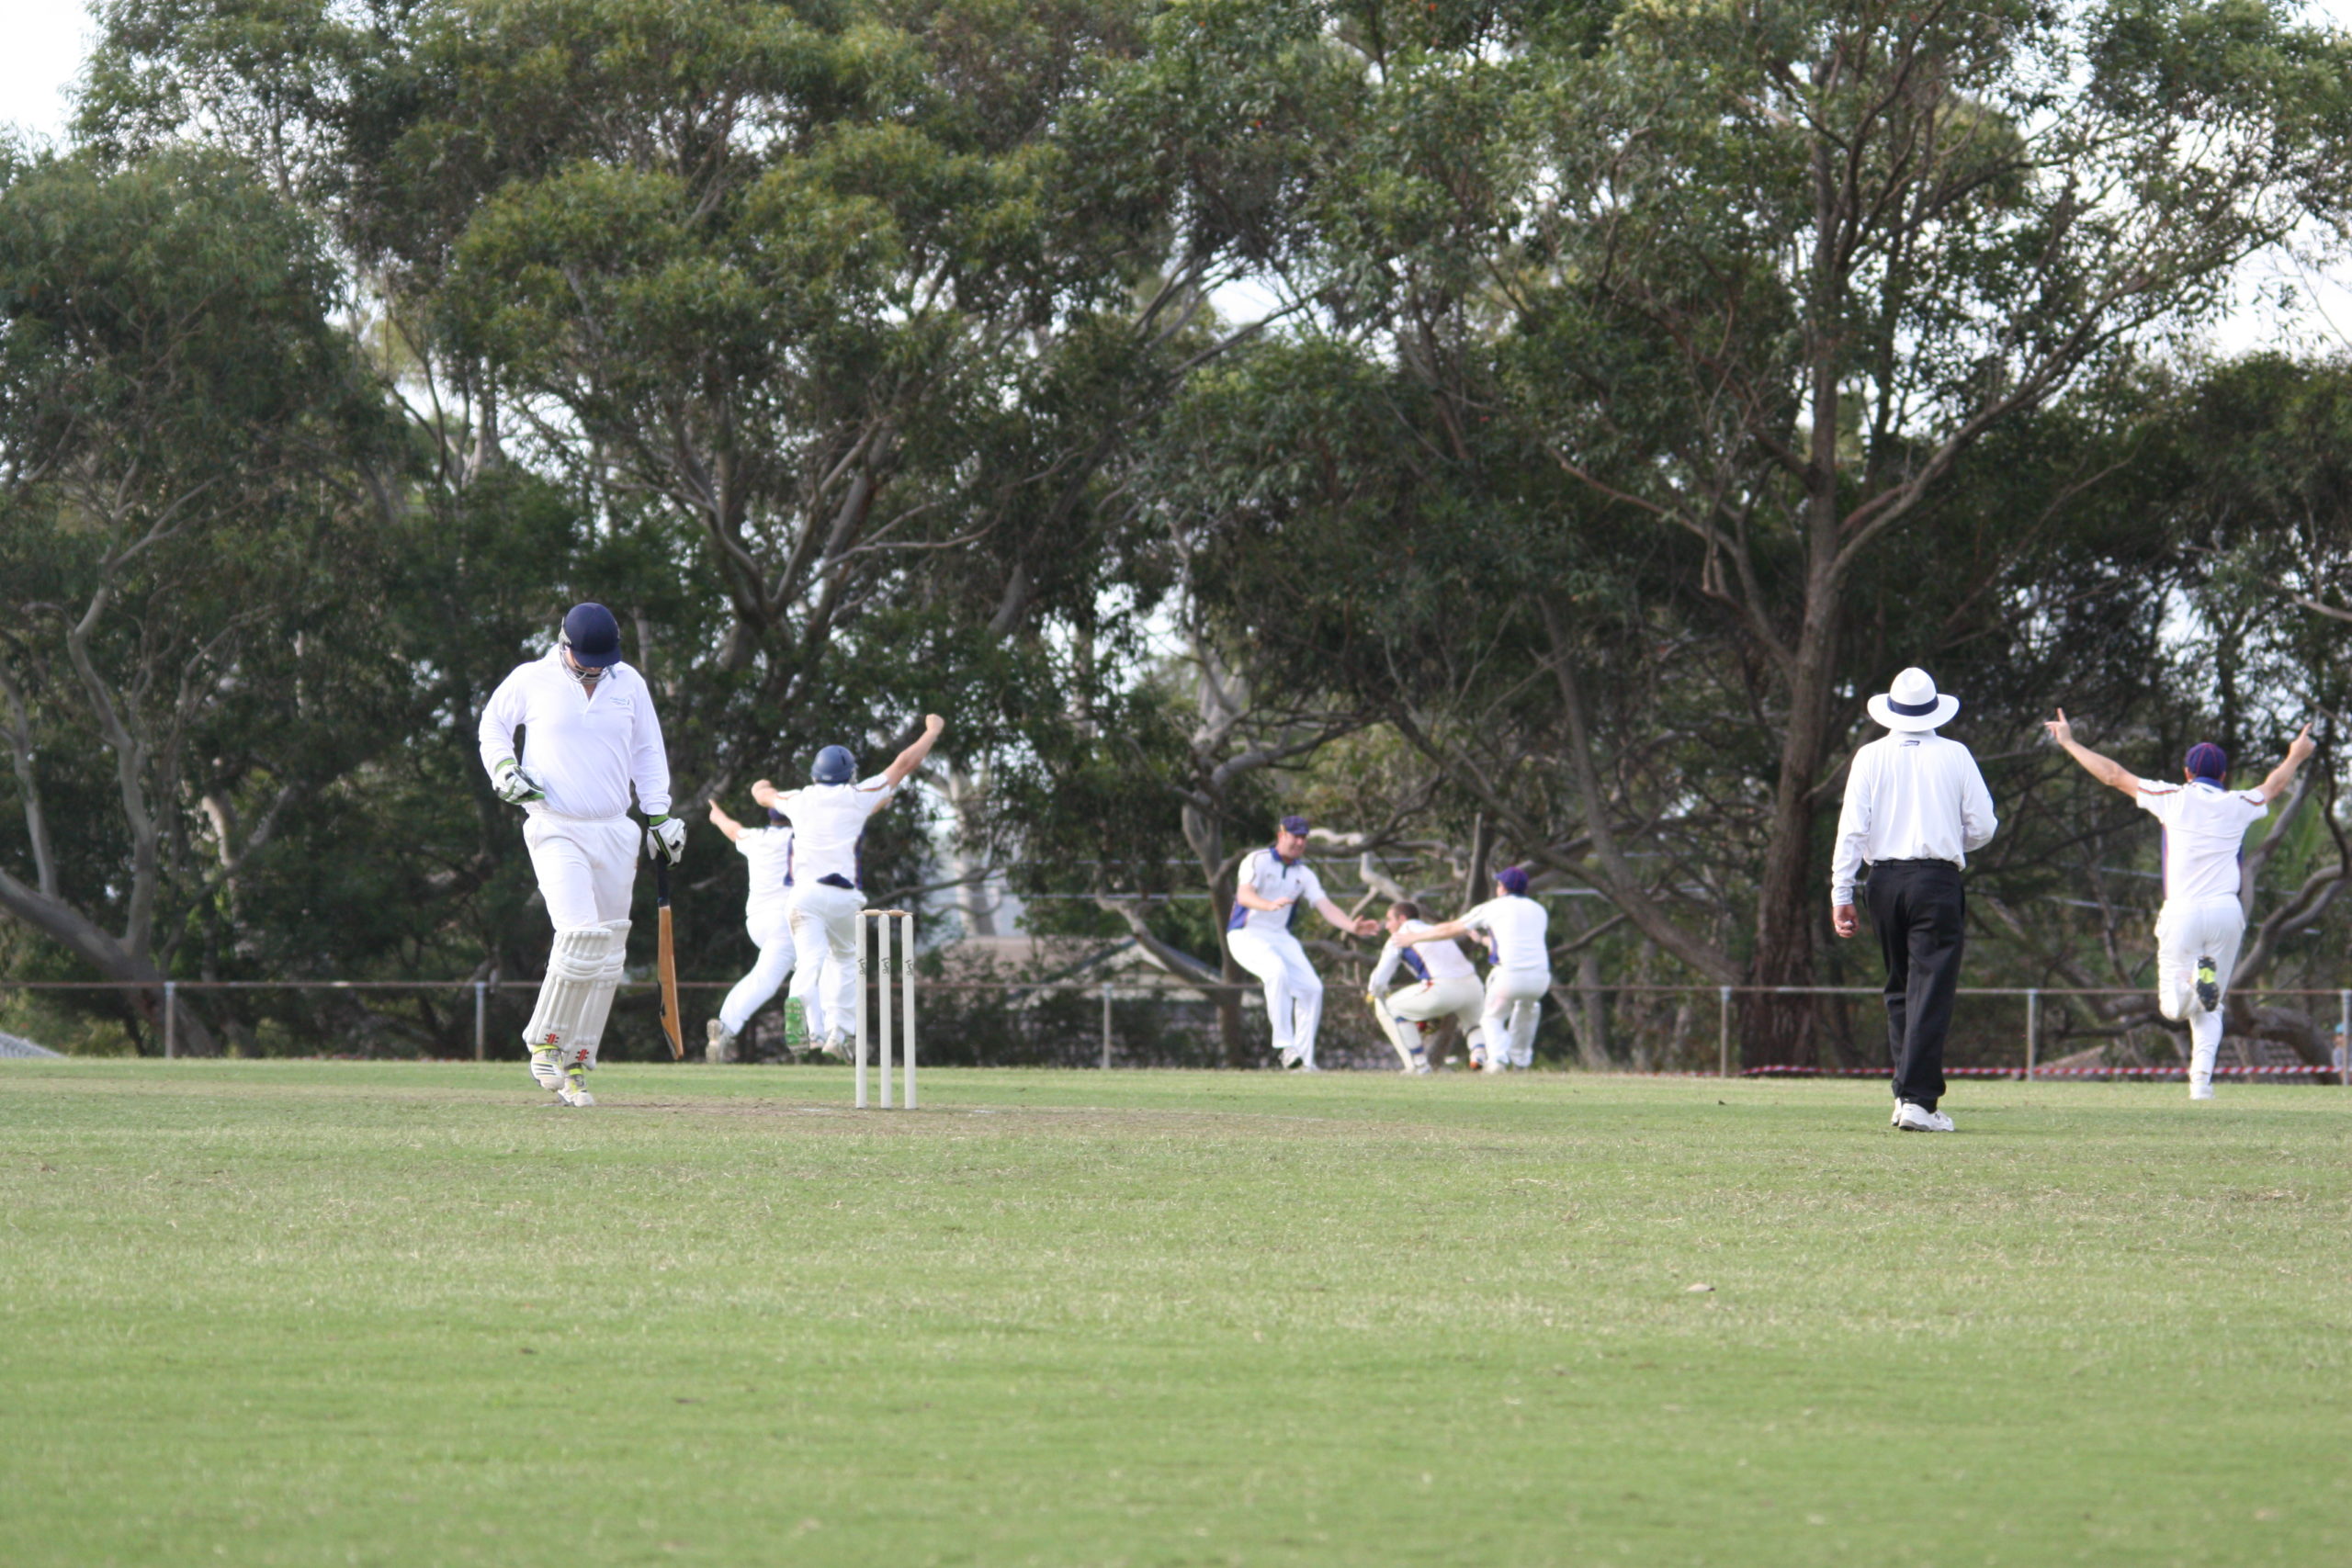 The winning catch A1 Grand Final (Rofie 3) - Stuart Newman (w/k) after catching the last wicket off Scott Henderson's bowling 2 Parklands Oval 29th & 30th March 2014.